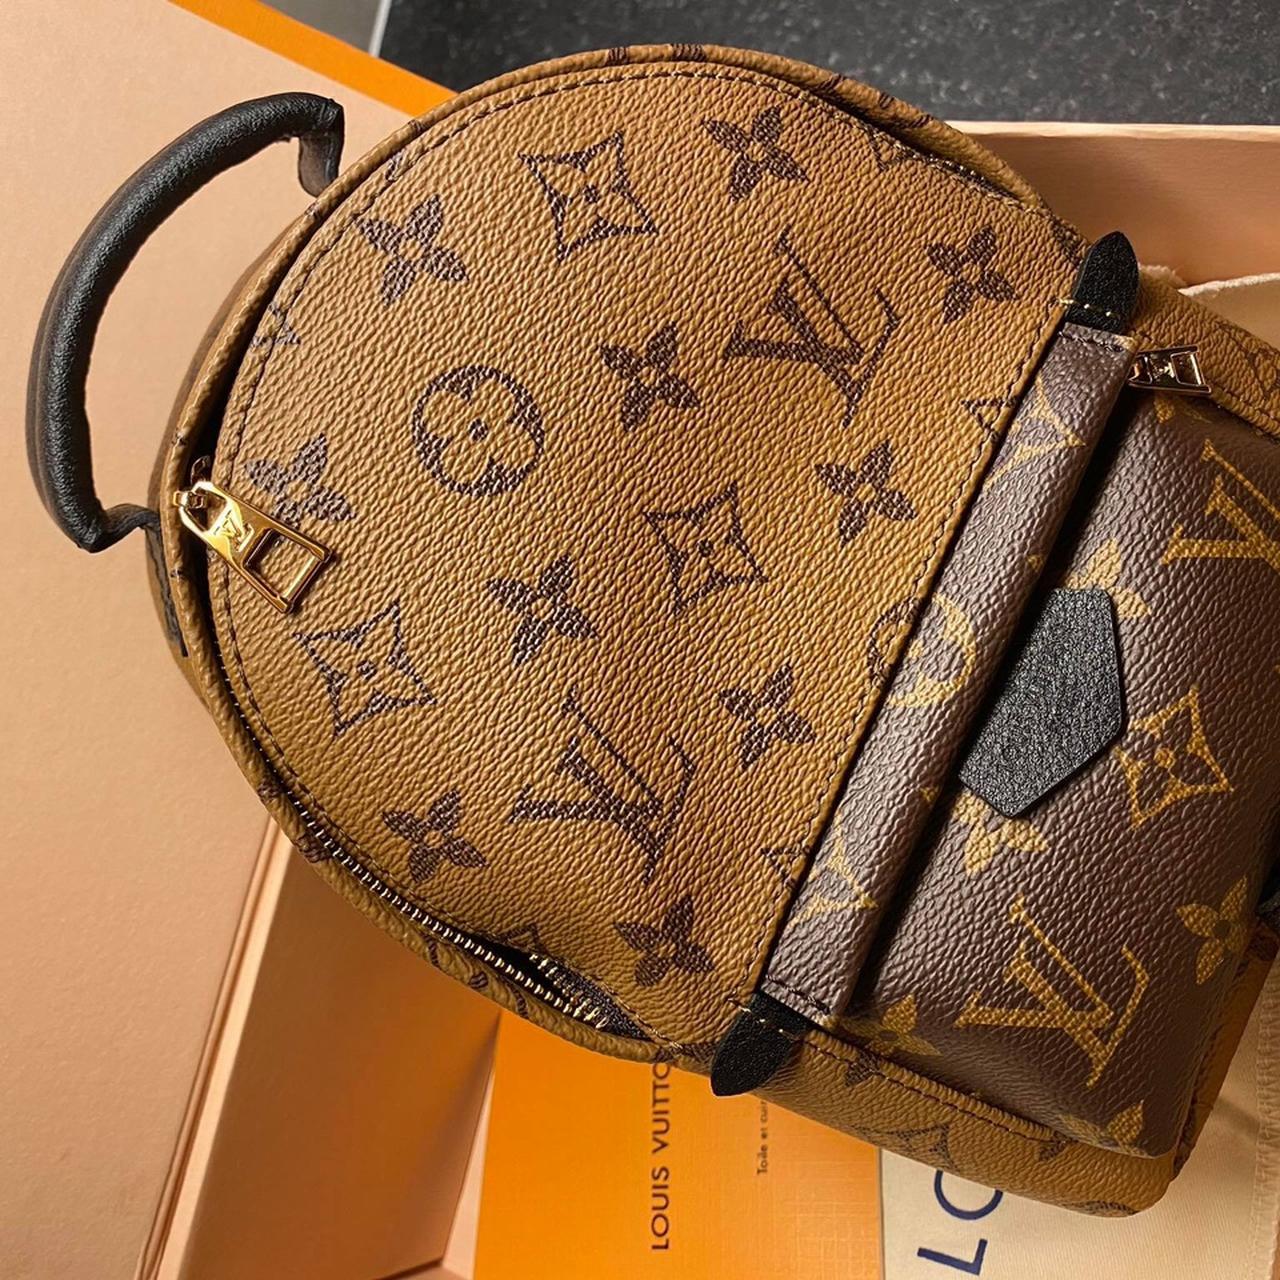 Louis Vuitton Palm Springs Mini Backpack *i was - Depop